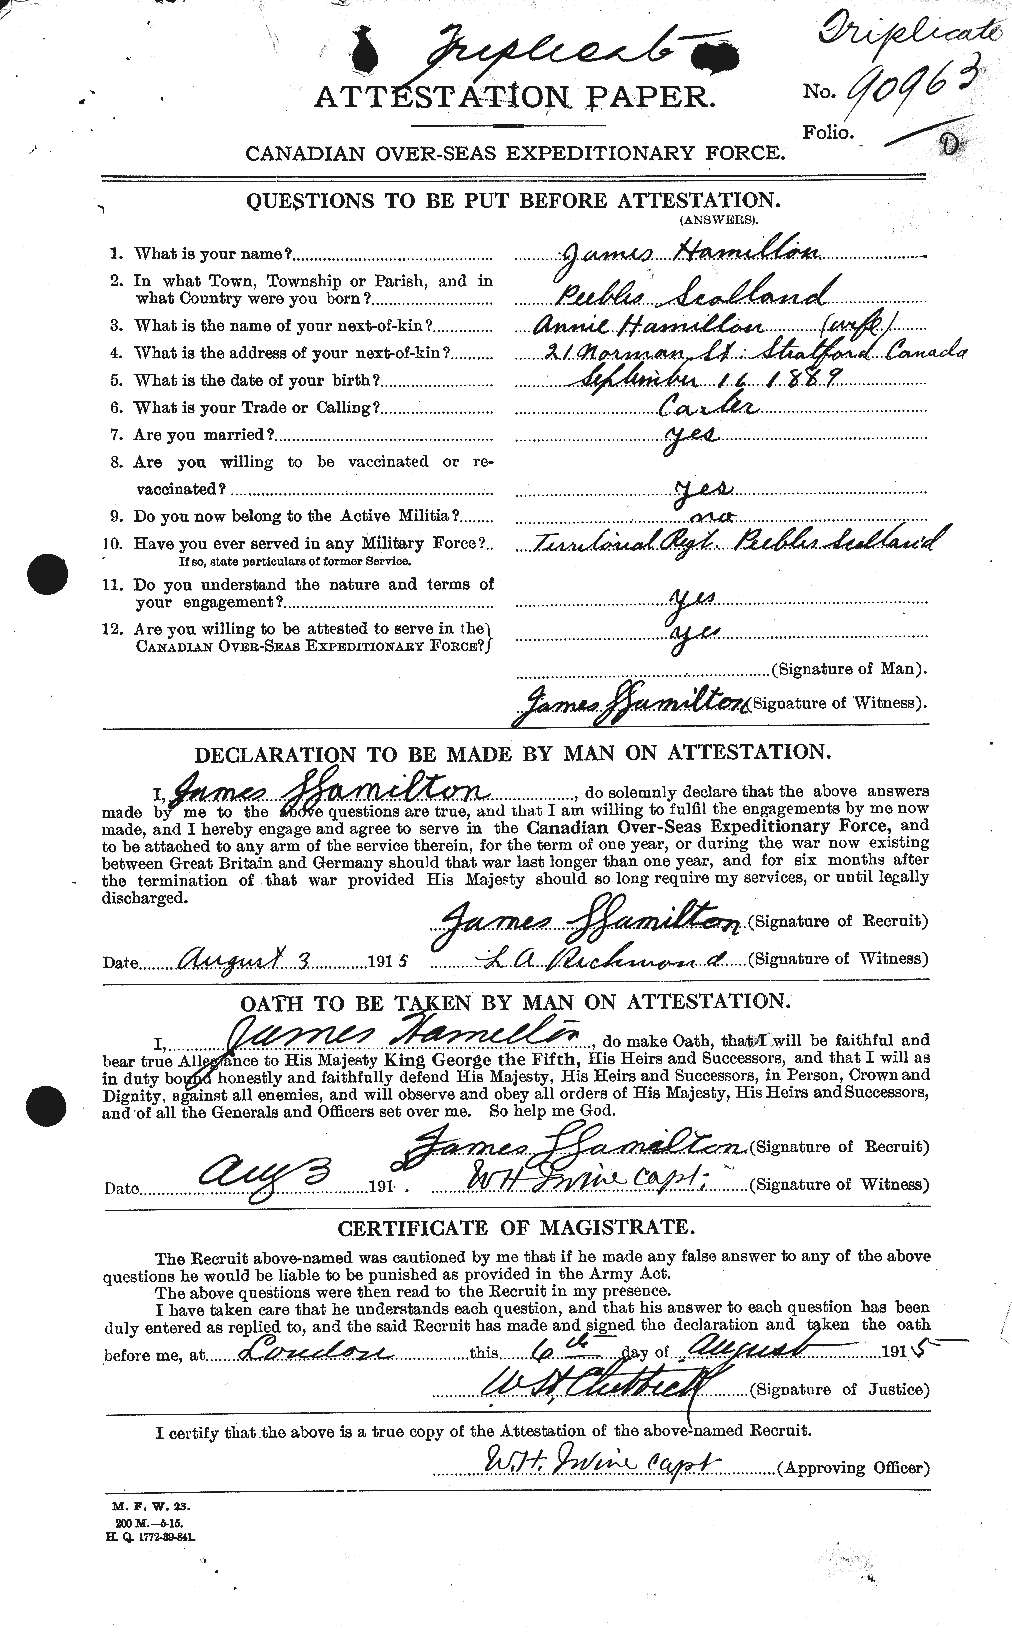 Personnel Records of the First World War - CEF 372942a